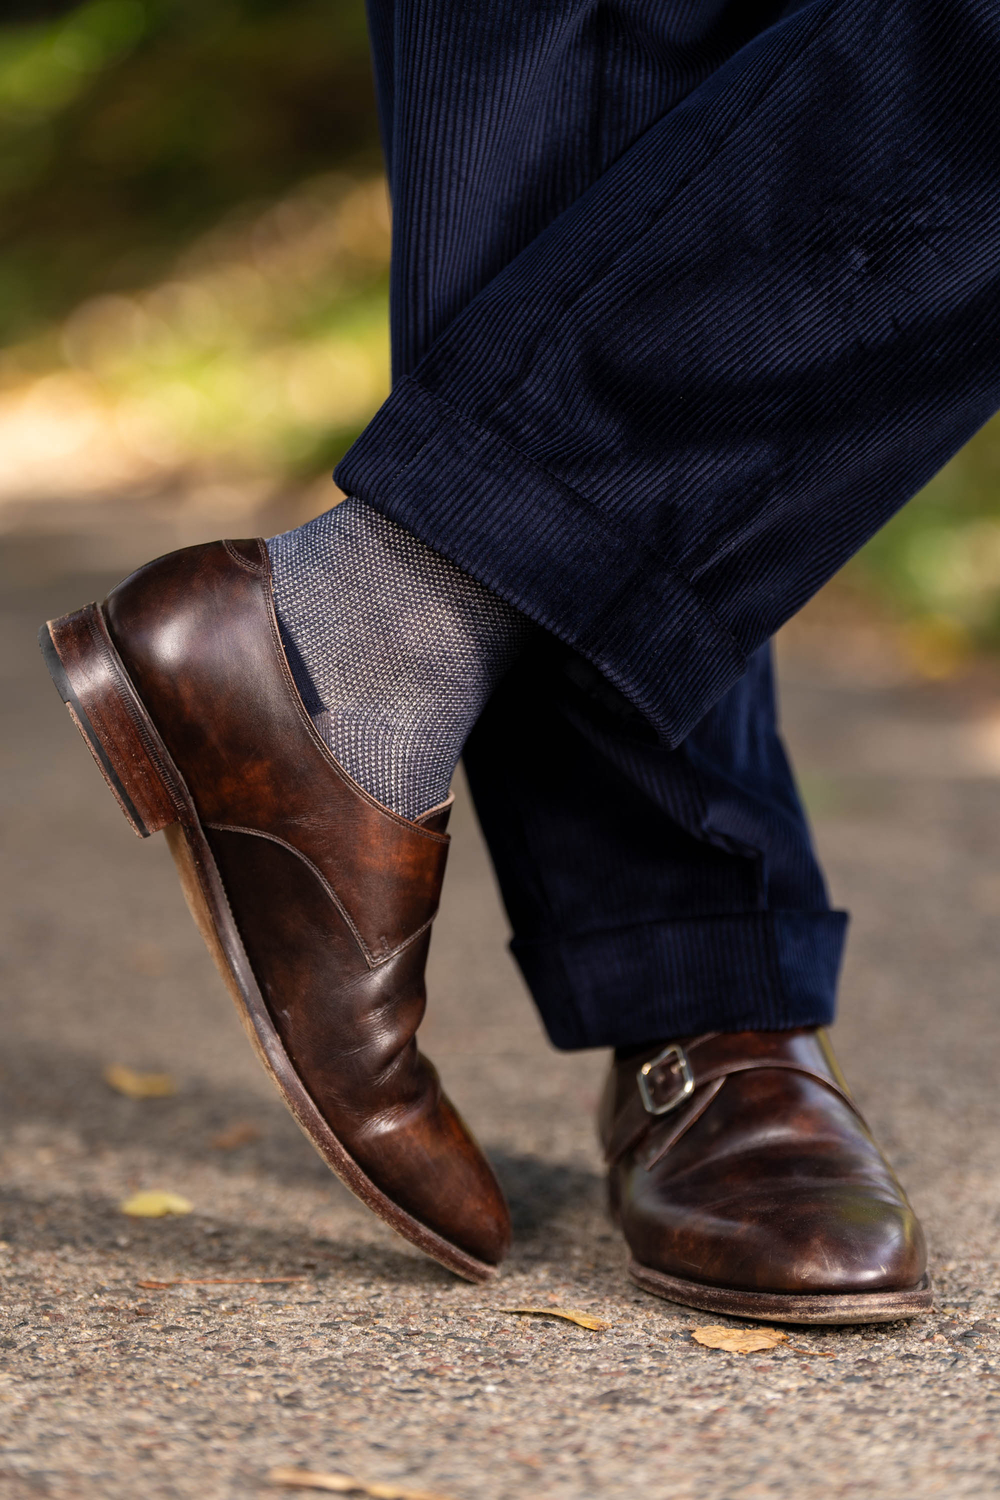 Midnight Blue Corduroy trousers with cuffs paired with brown monk straps and Two-Tone Solid Socks.